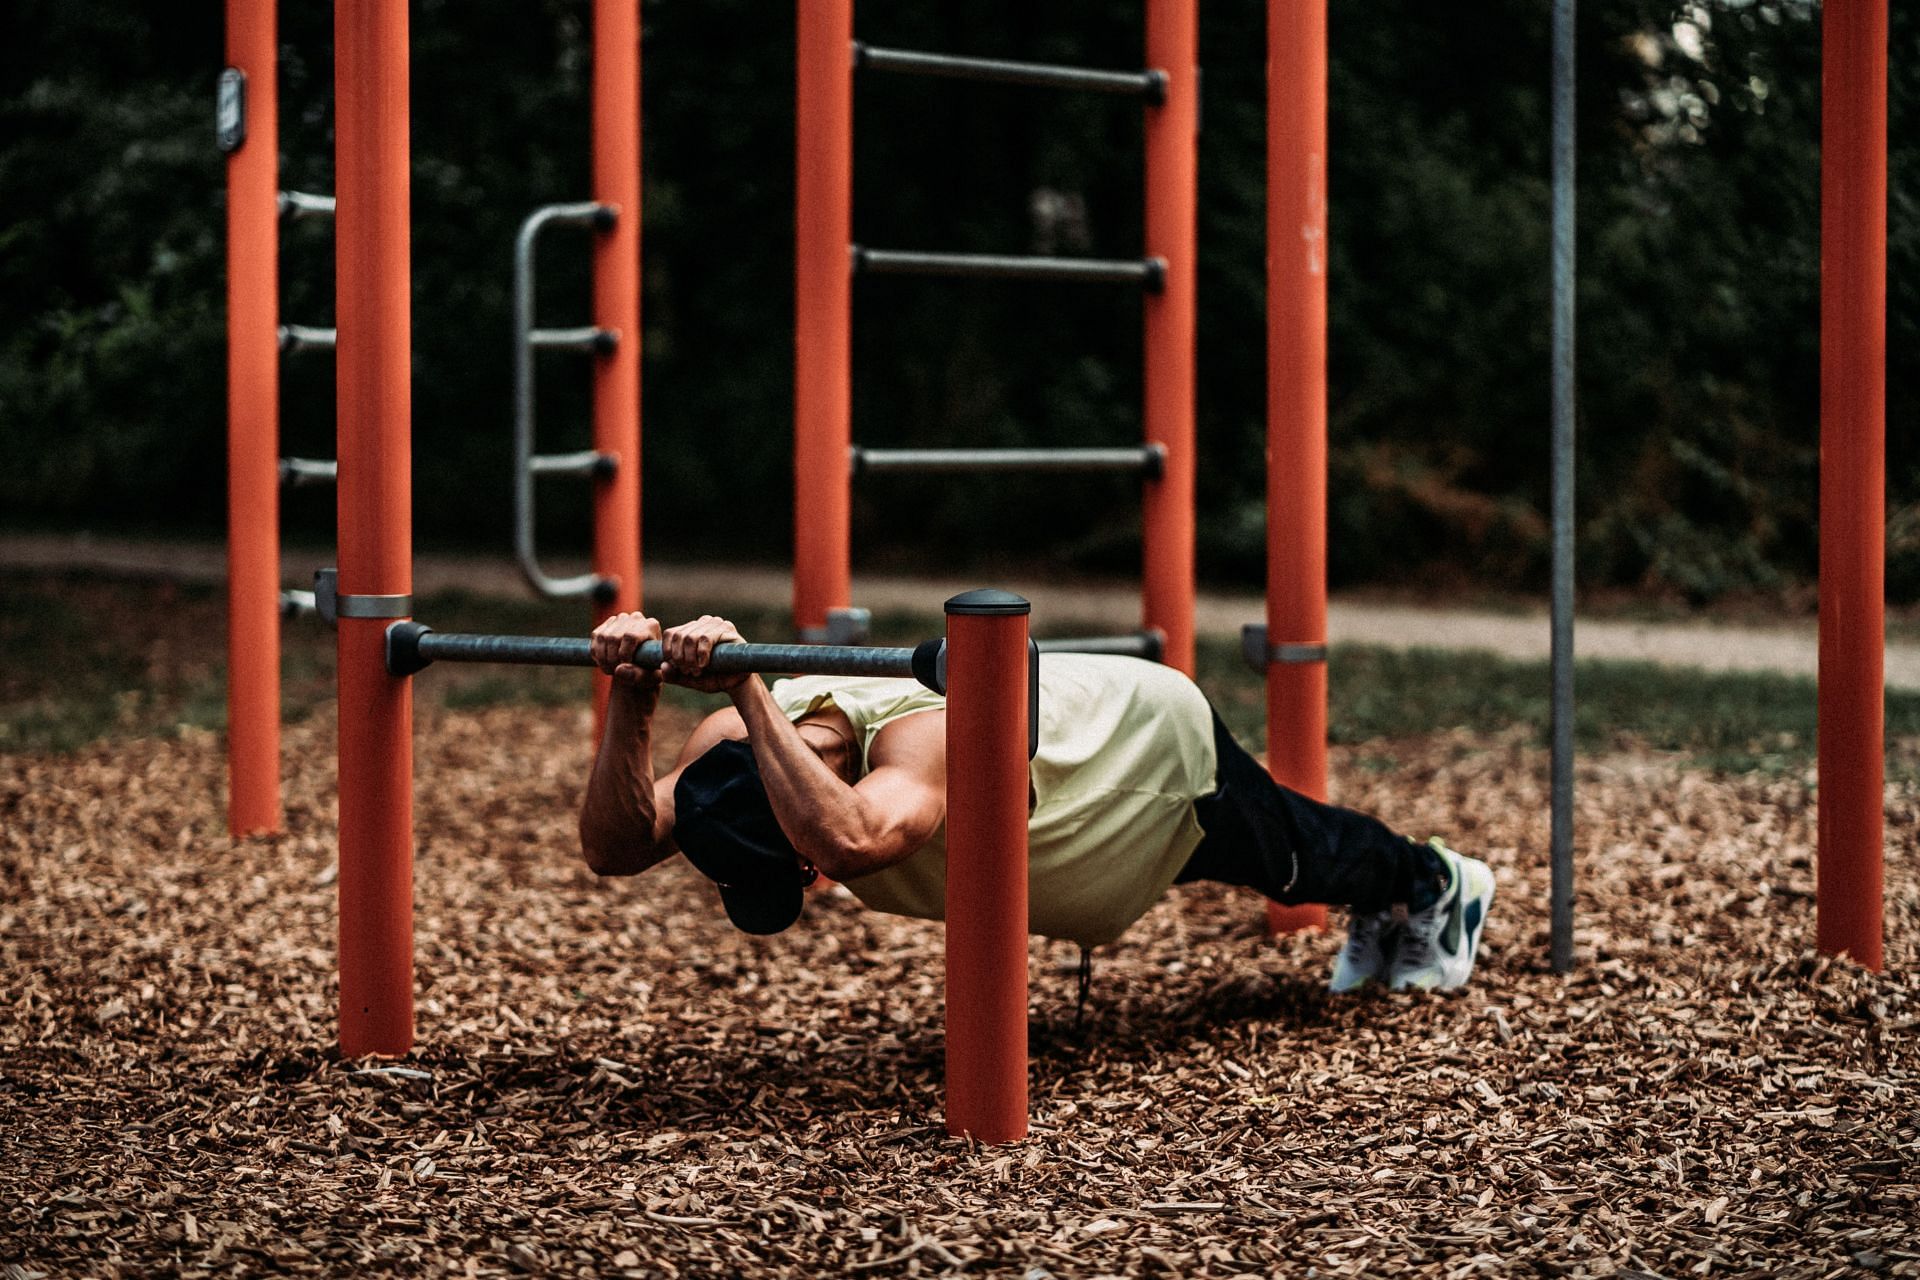 Inverted exercise as an chin-up alternative. (Image via Pexels/Niko Twisty)